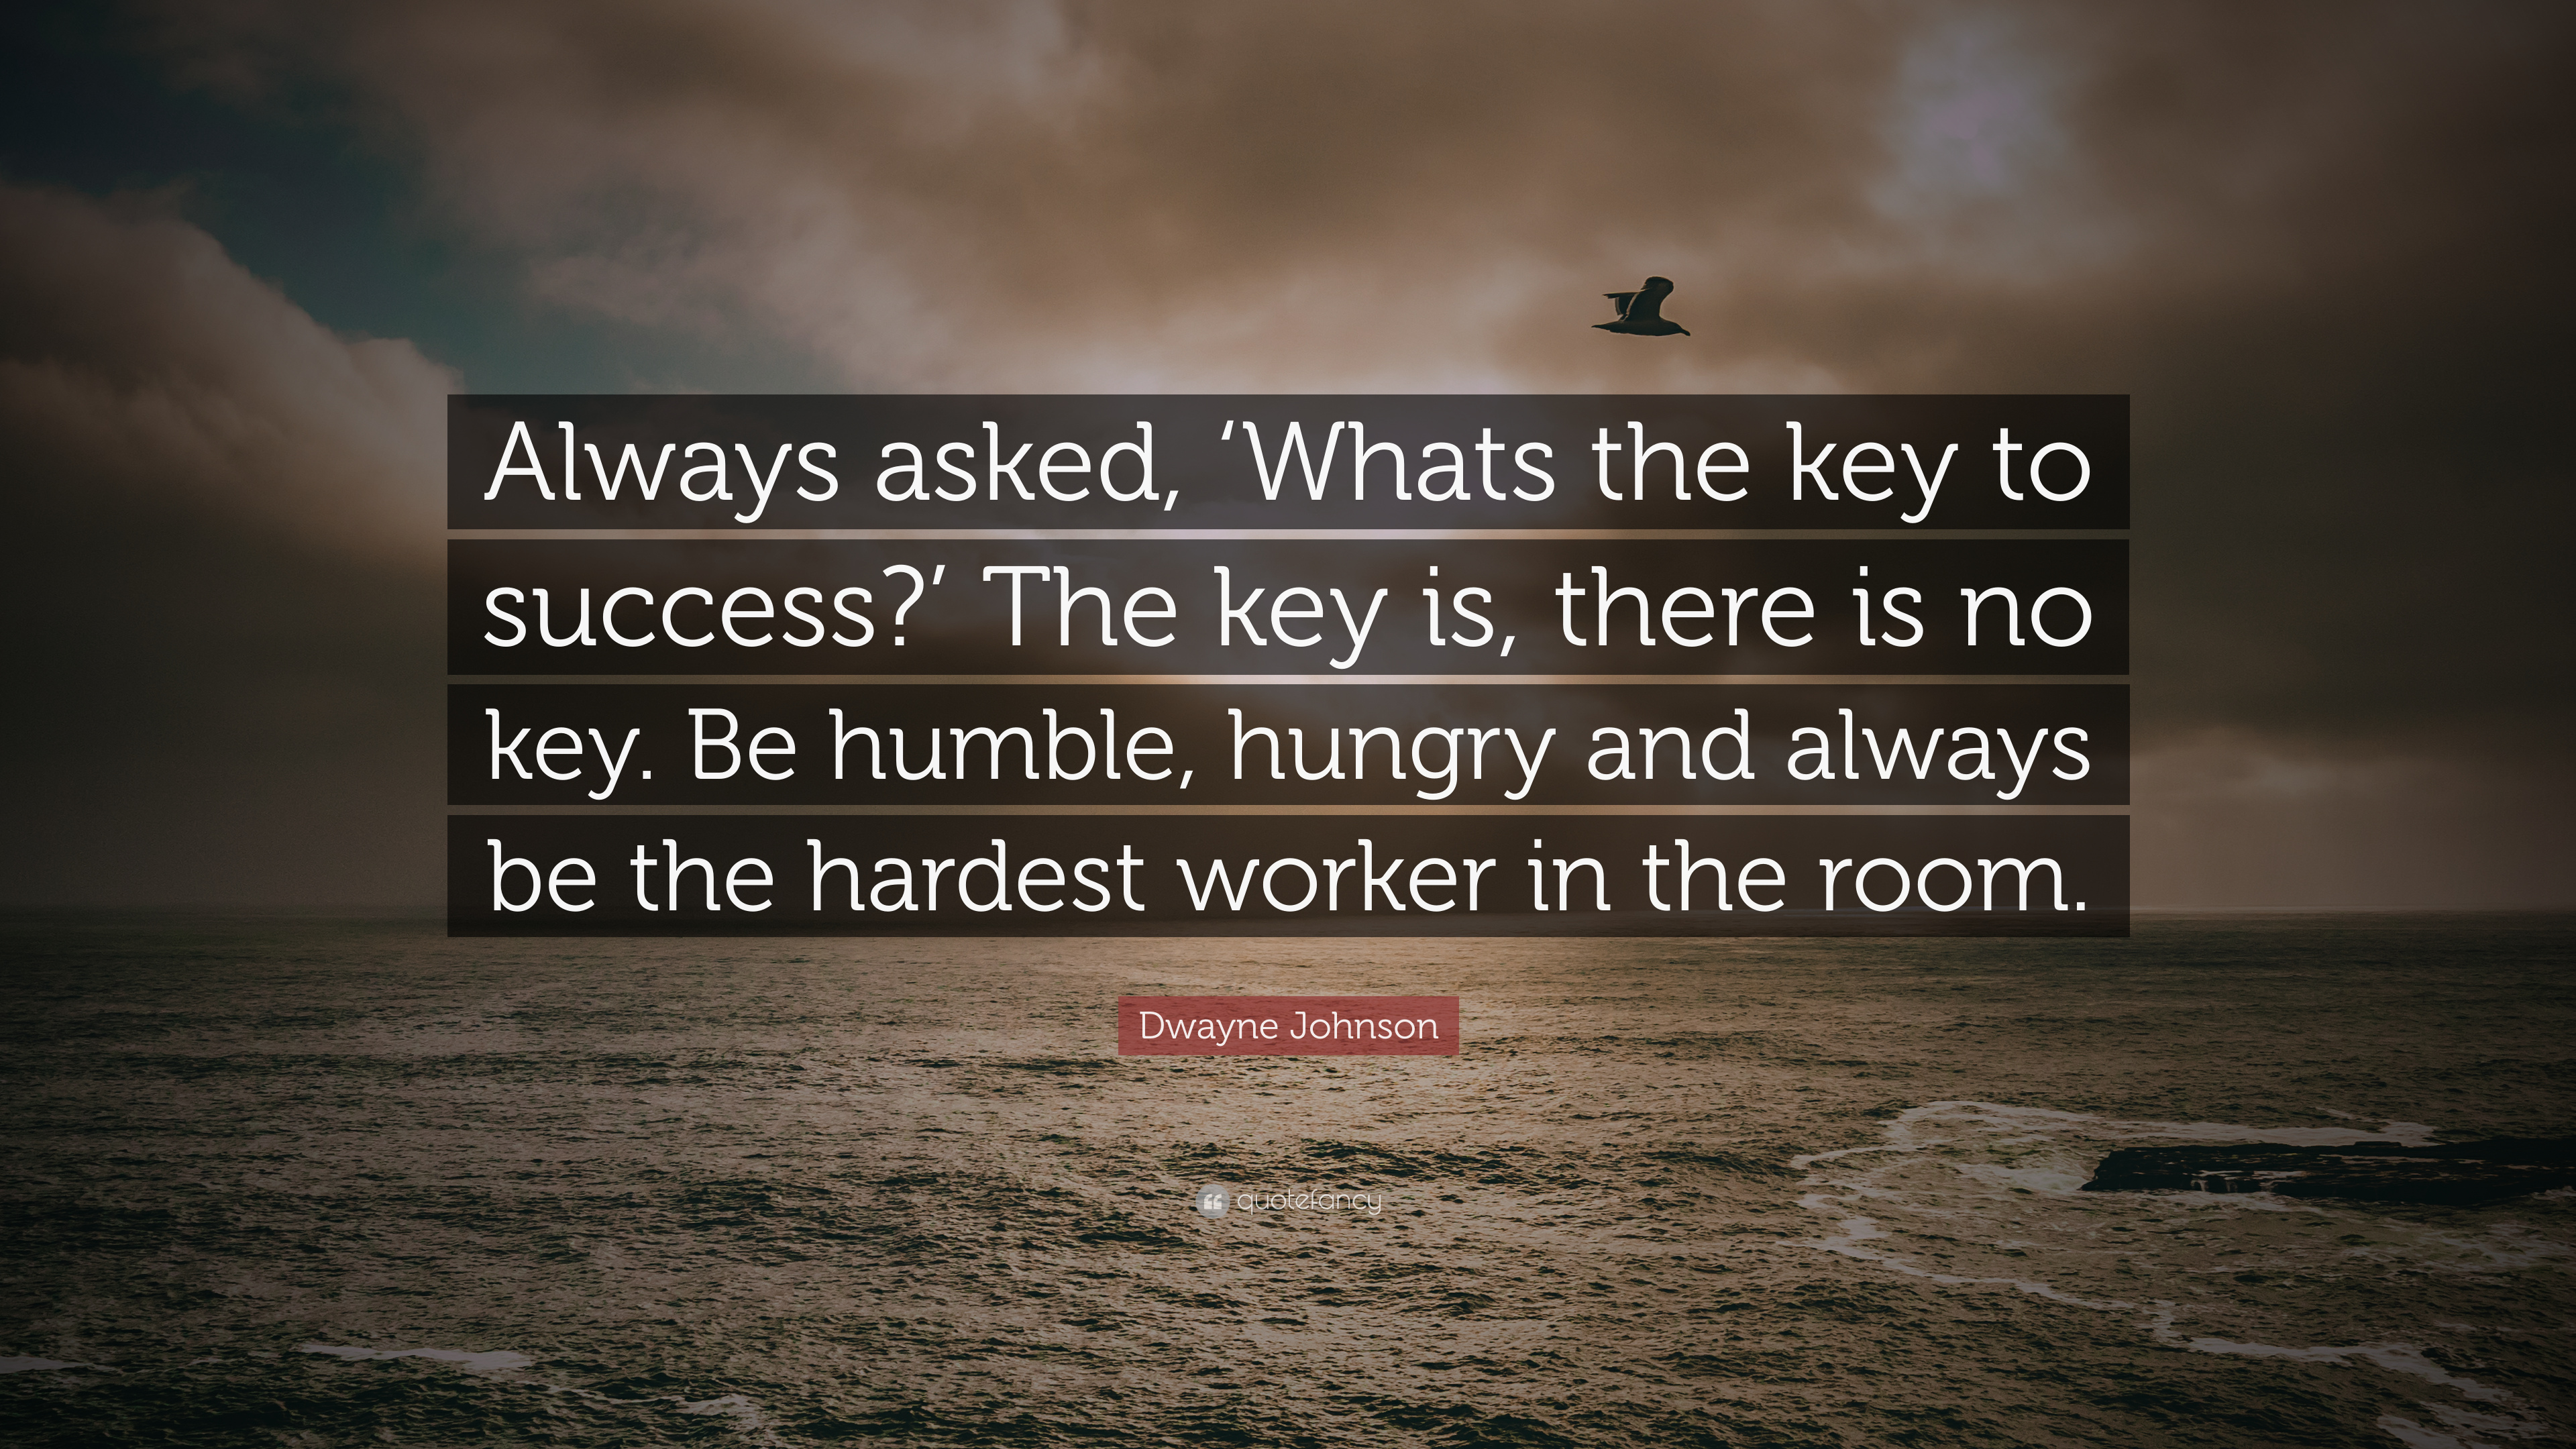 Dwayne Johnson Quote: “Always asked, 'Whats the key to success?' The key is, there is no key. Be humble, hungry and always be the hardest worke.”